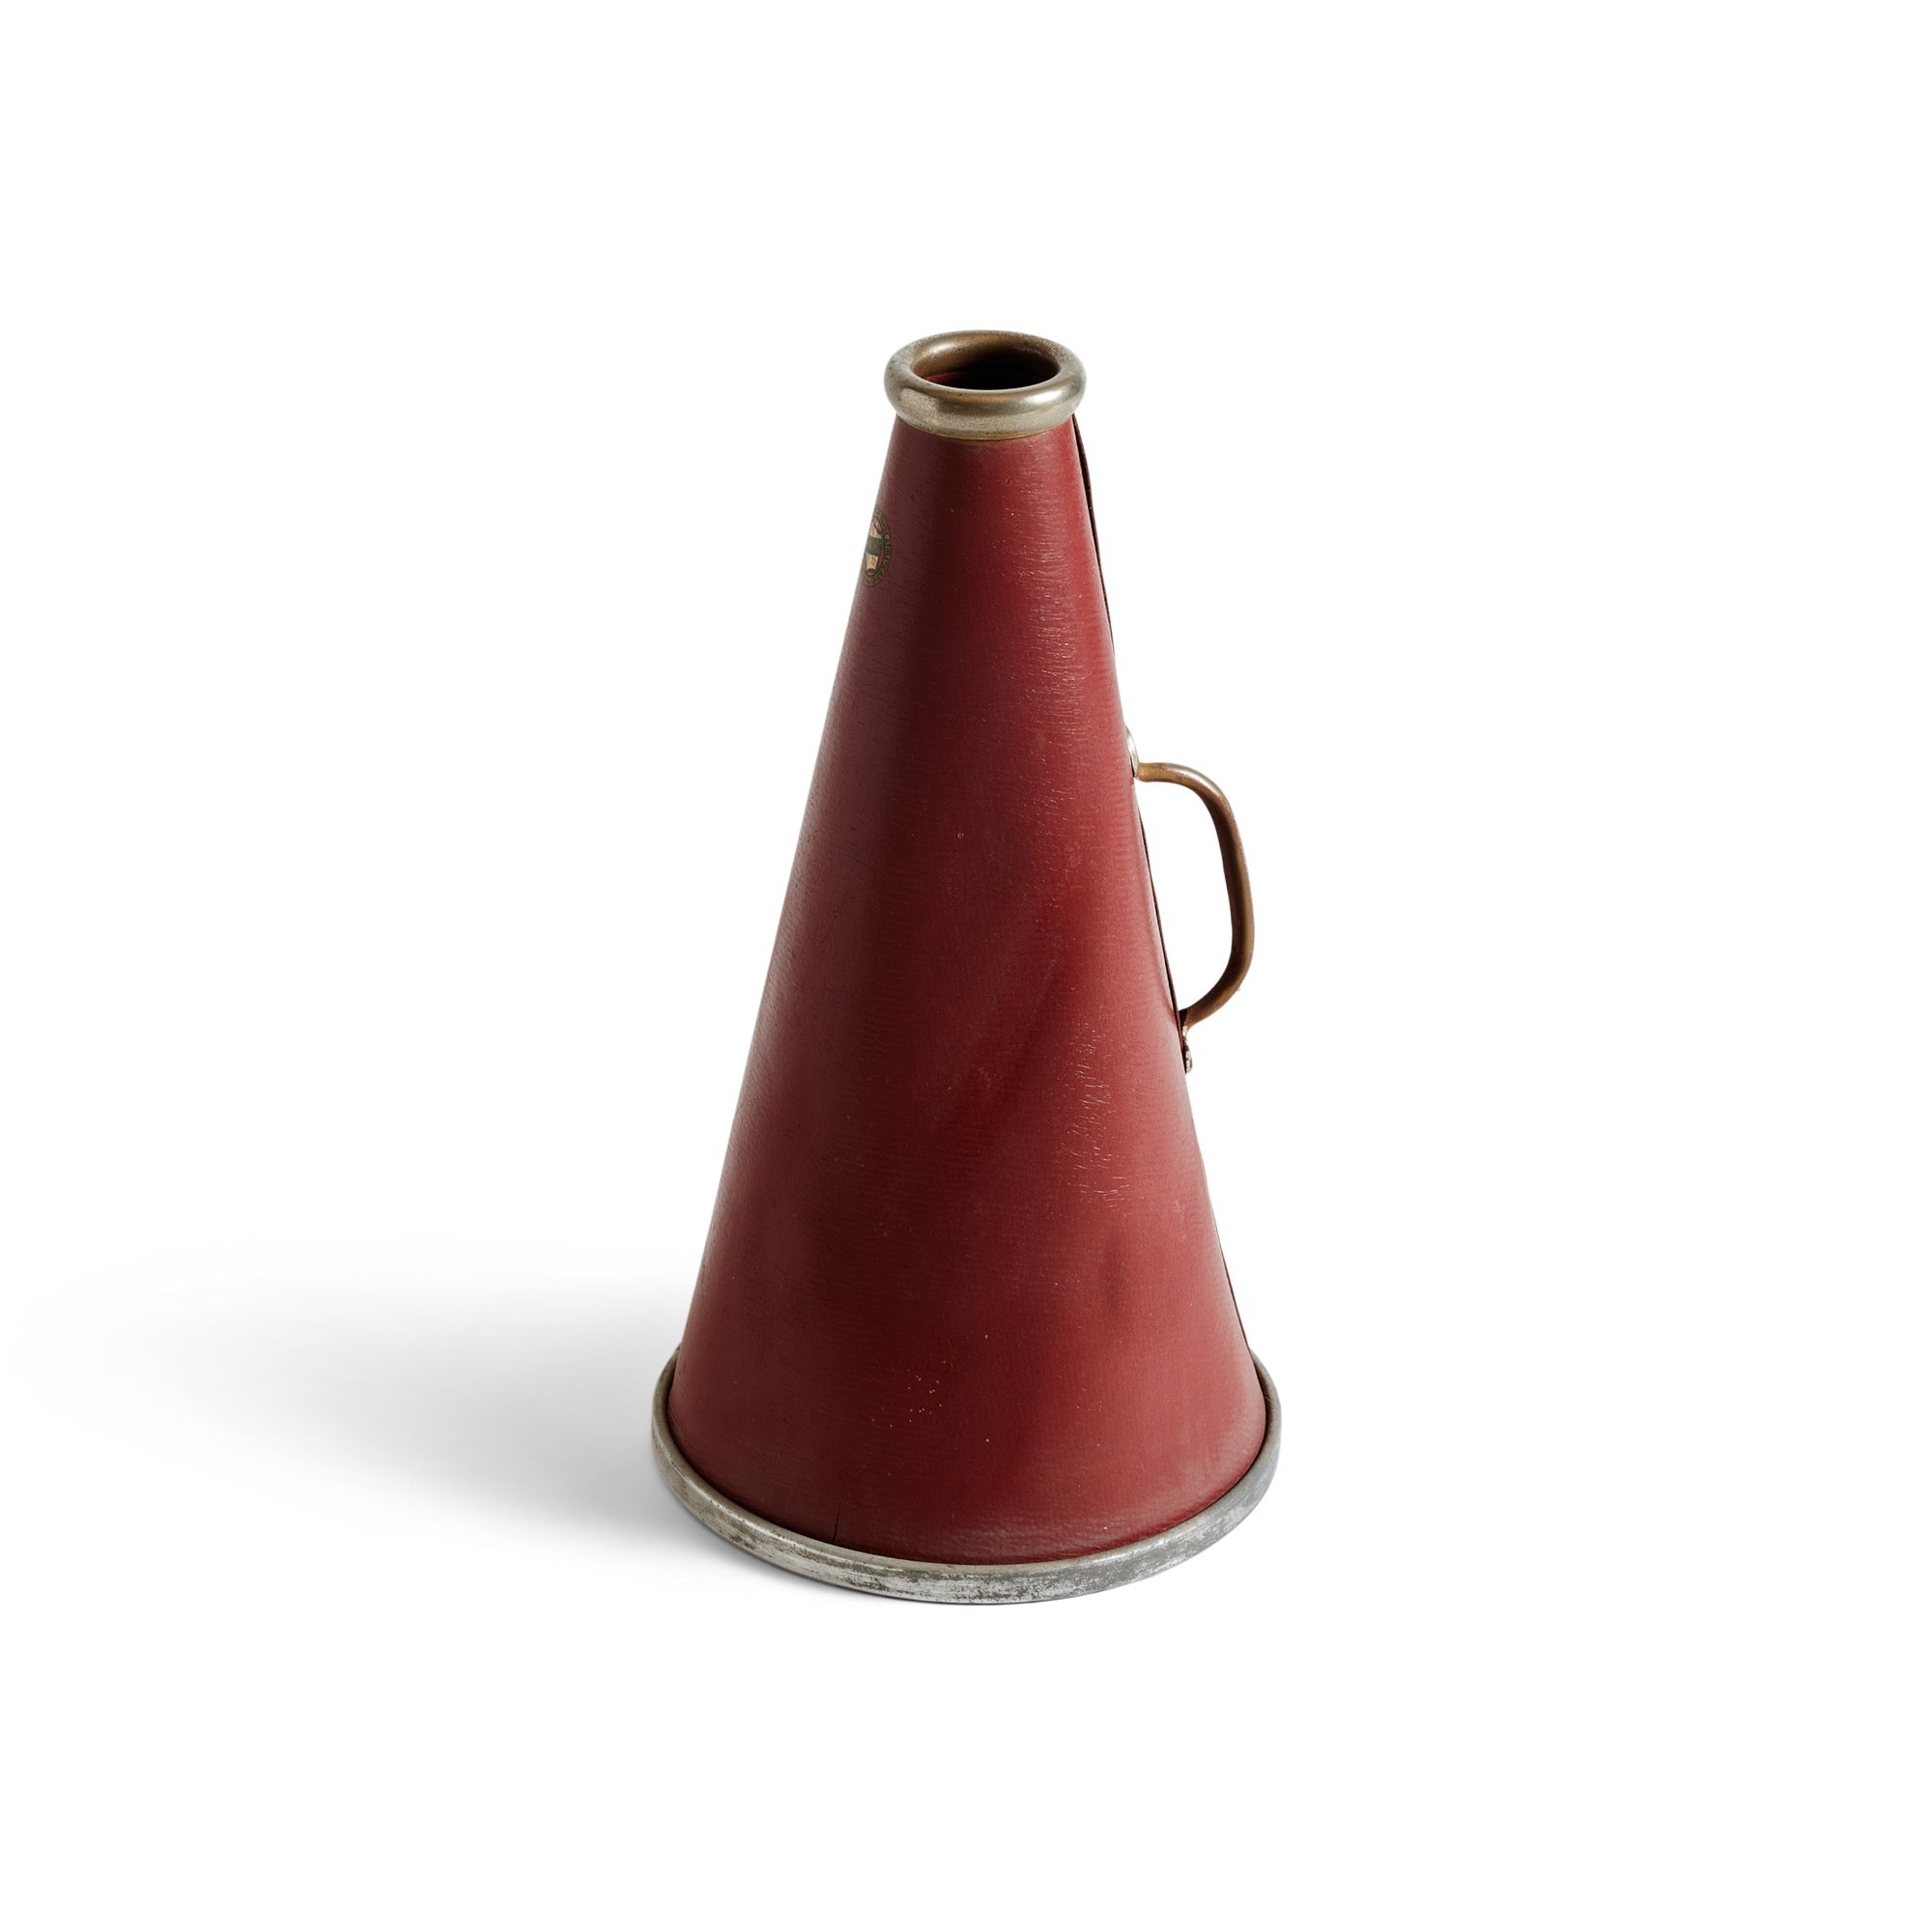 Vintage All-American Cheerleader’s Megaphone: A Crimson Icon of Americana for Rawlings Mfg. Co.